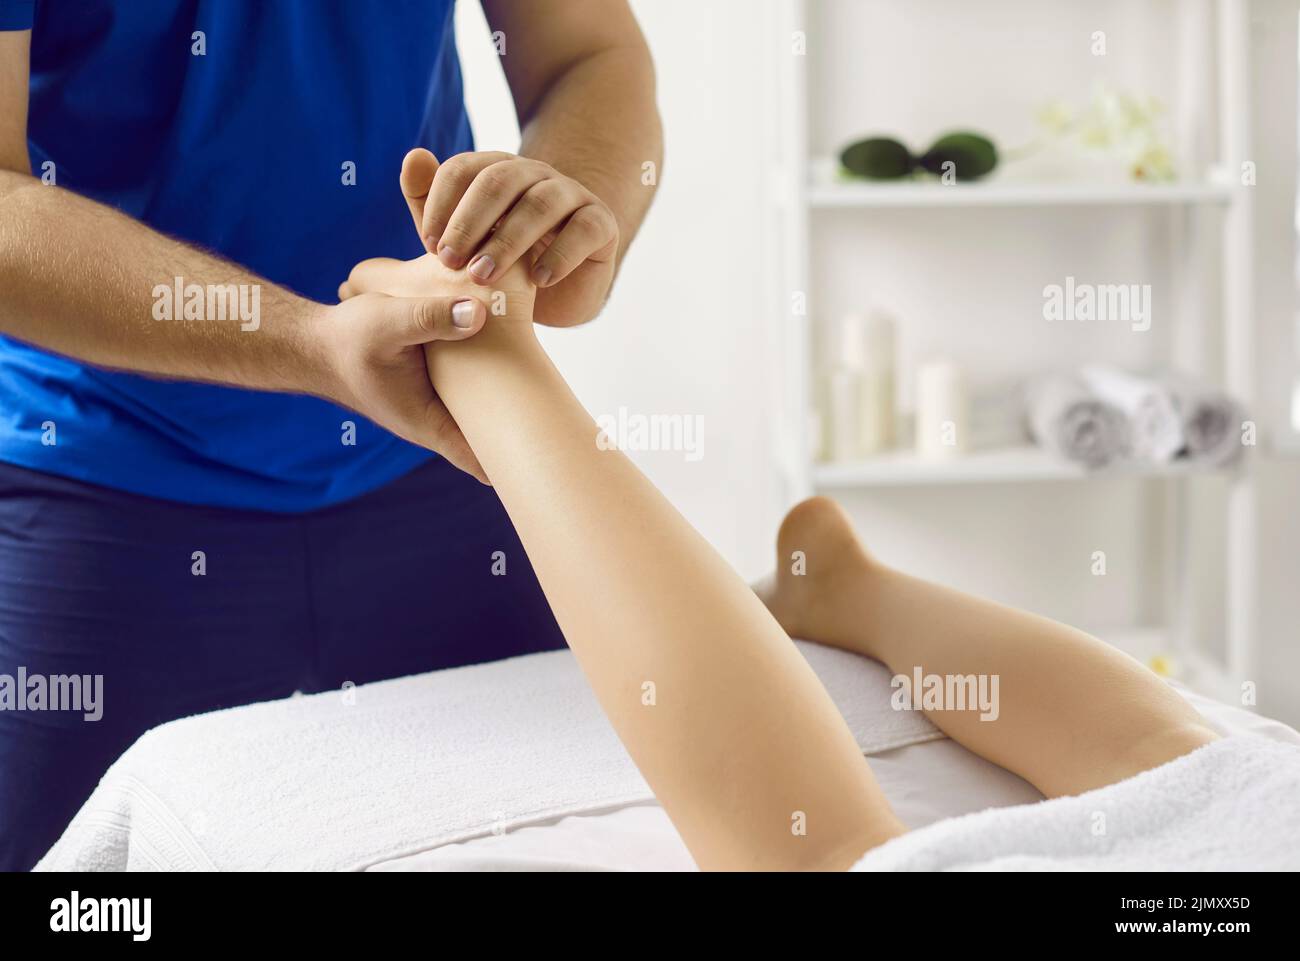 Professional in acupressure therapy and reflexology massaging young woman's foot Stock Photo